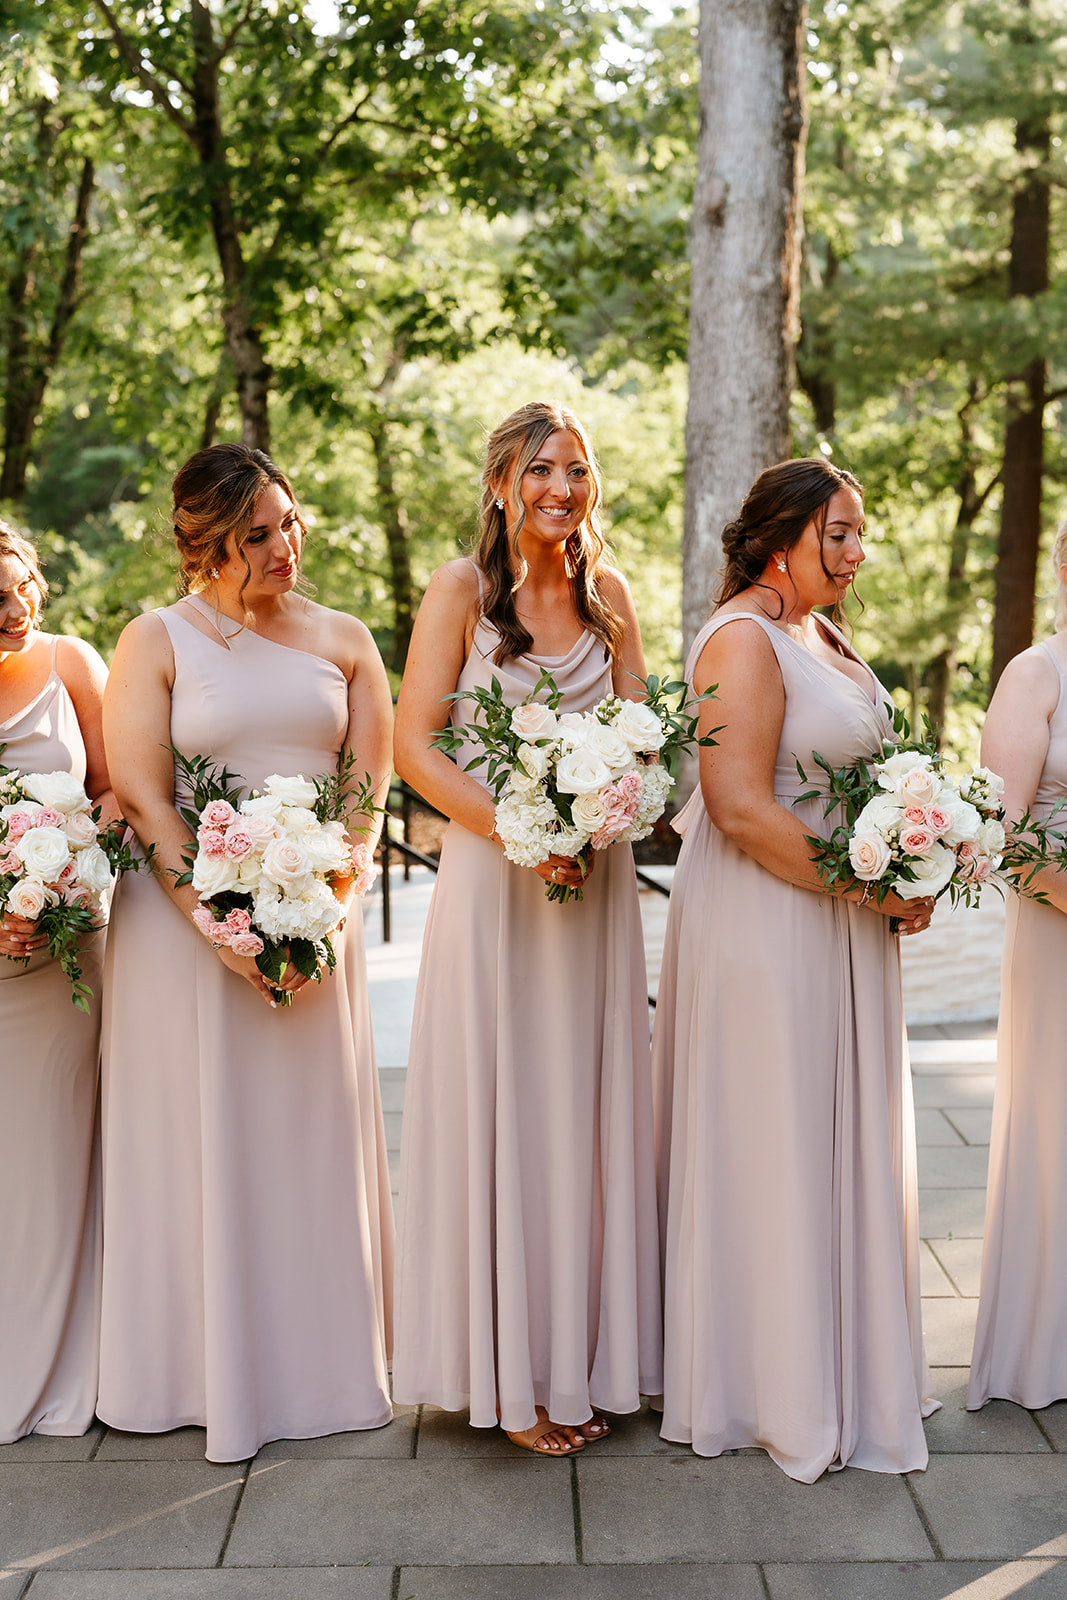 Three bridesmaids wearing matching long, pastel-colored dresses, and holding bouquets of white and pink flowers, stand in a row outdoors with trees in the background.